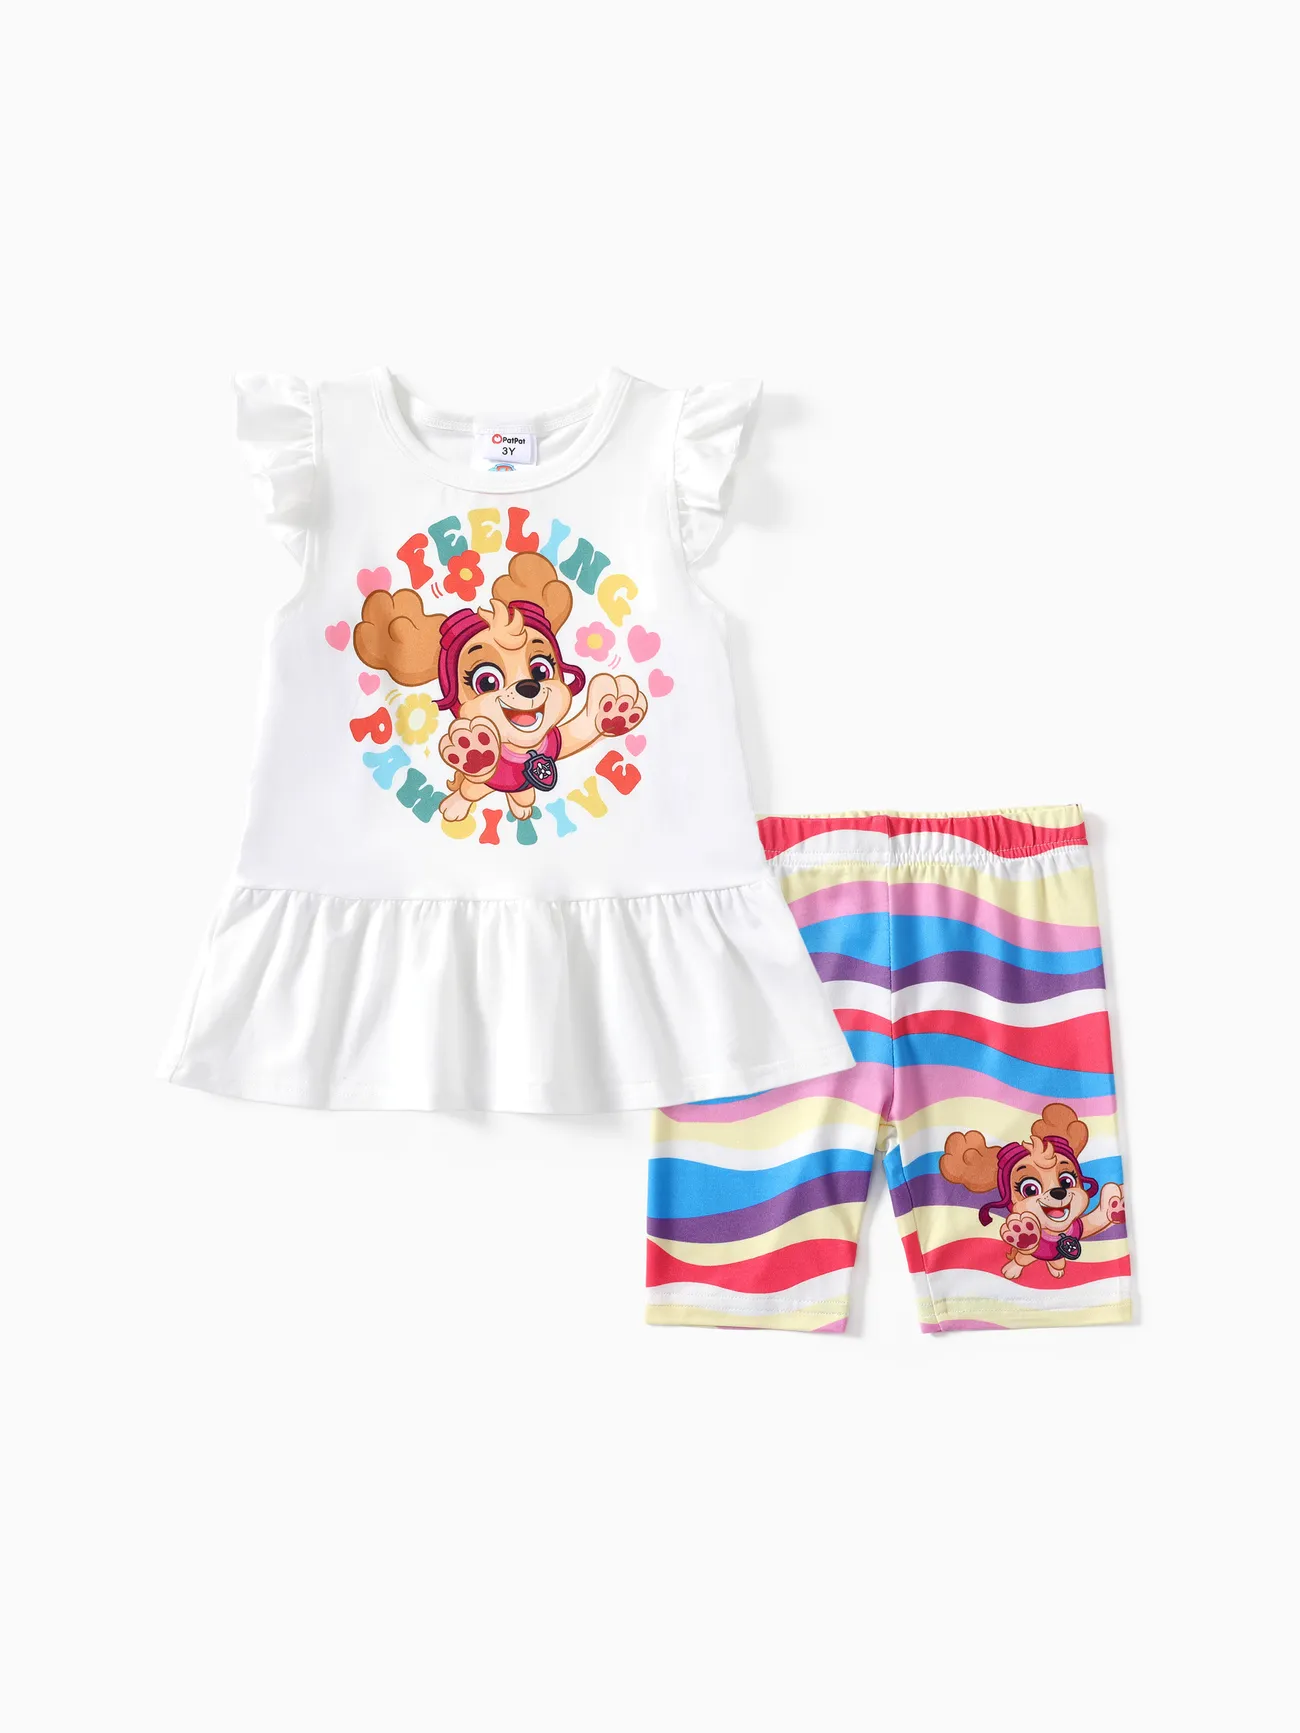 Paw Patrol Toddler Girls 2pcs Cute Character Floral Print Flutter-sleeve Top with Flower Rainbow Print Leggings Set White big image 1